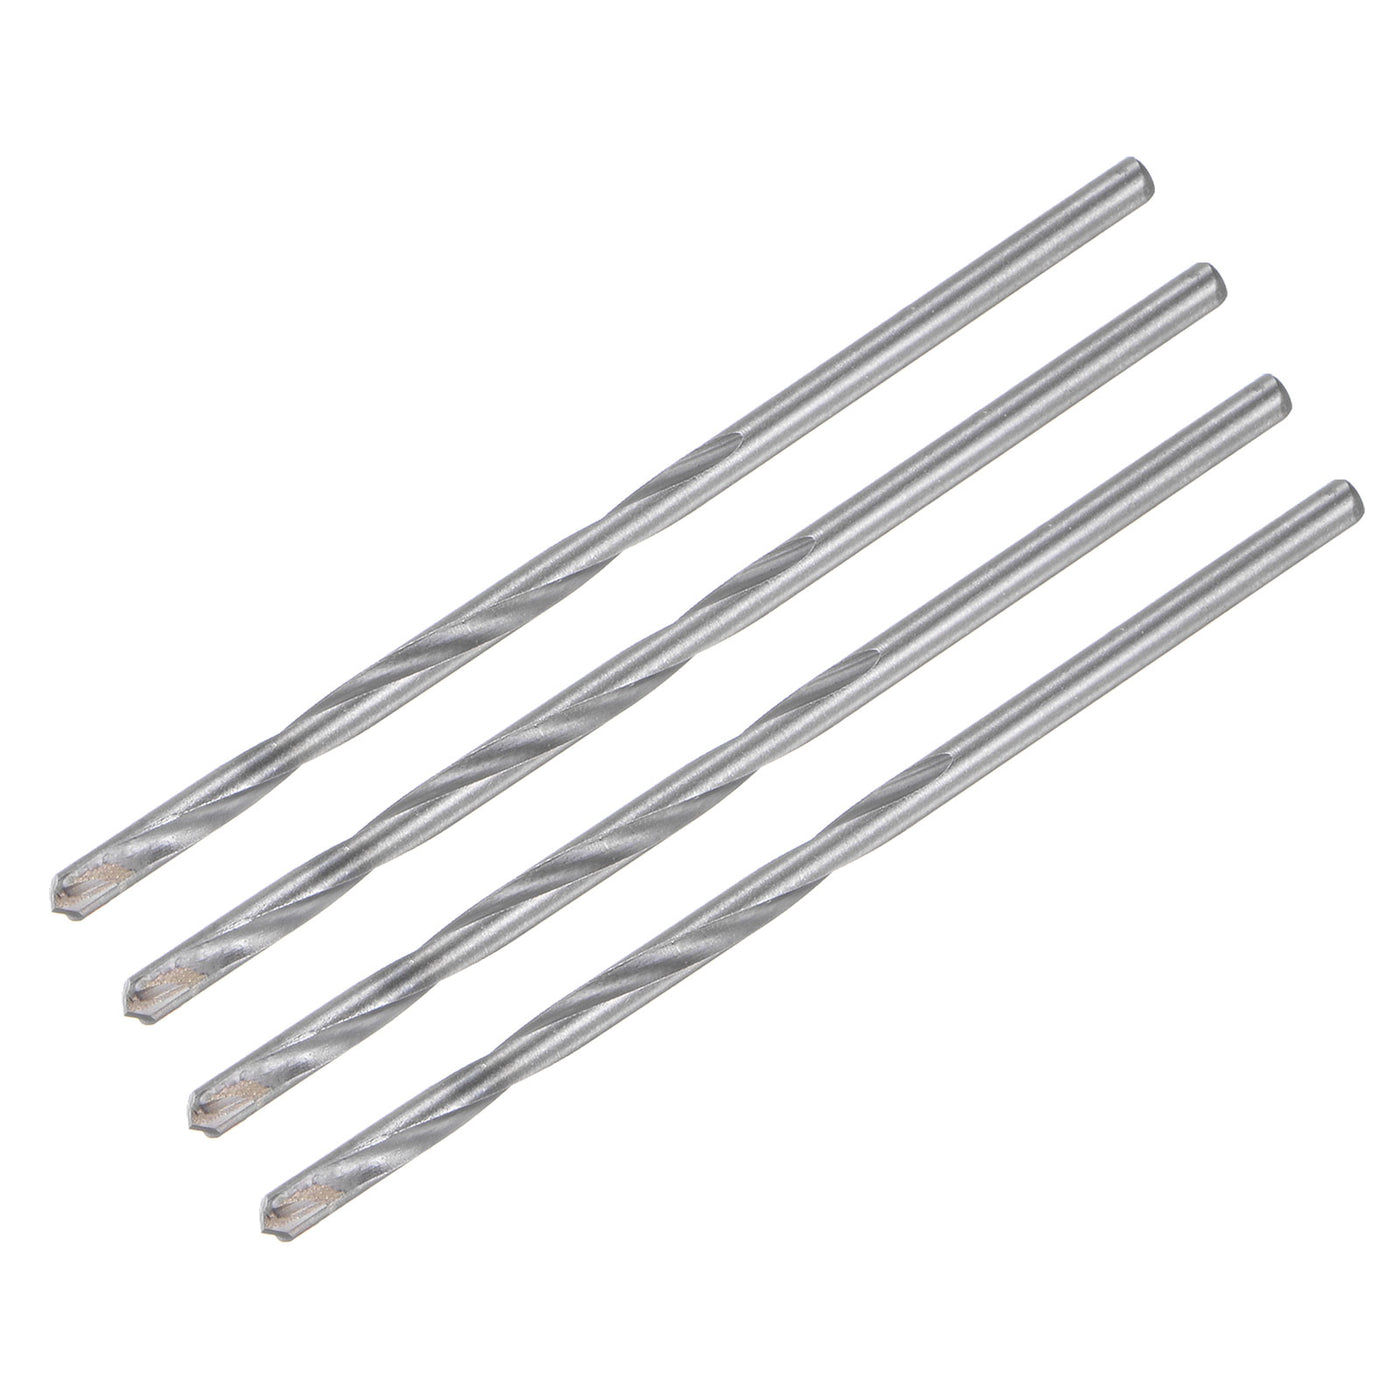 uxcell Uxcell 4mm Cutting Dia Round Shank Cemented Carbide Twist Drill Bit, 100mm Length 4 Pcs